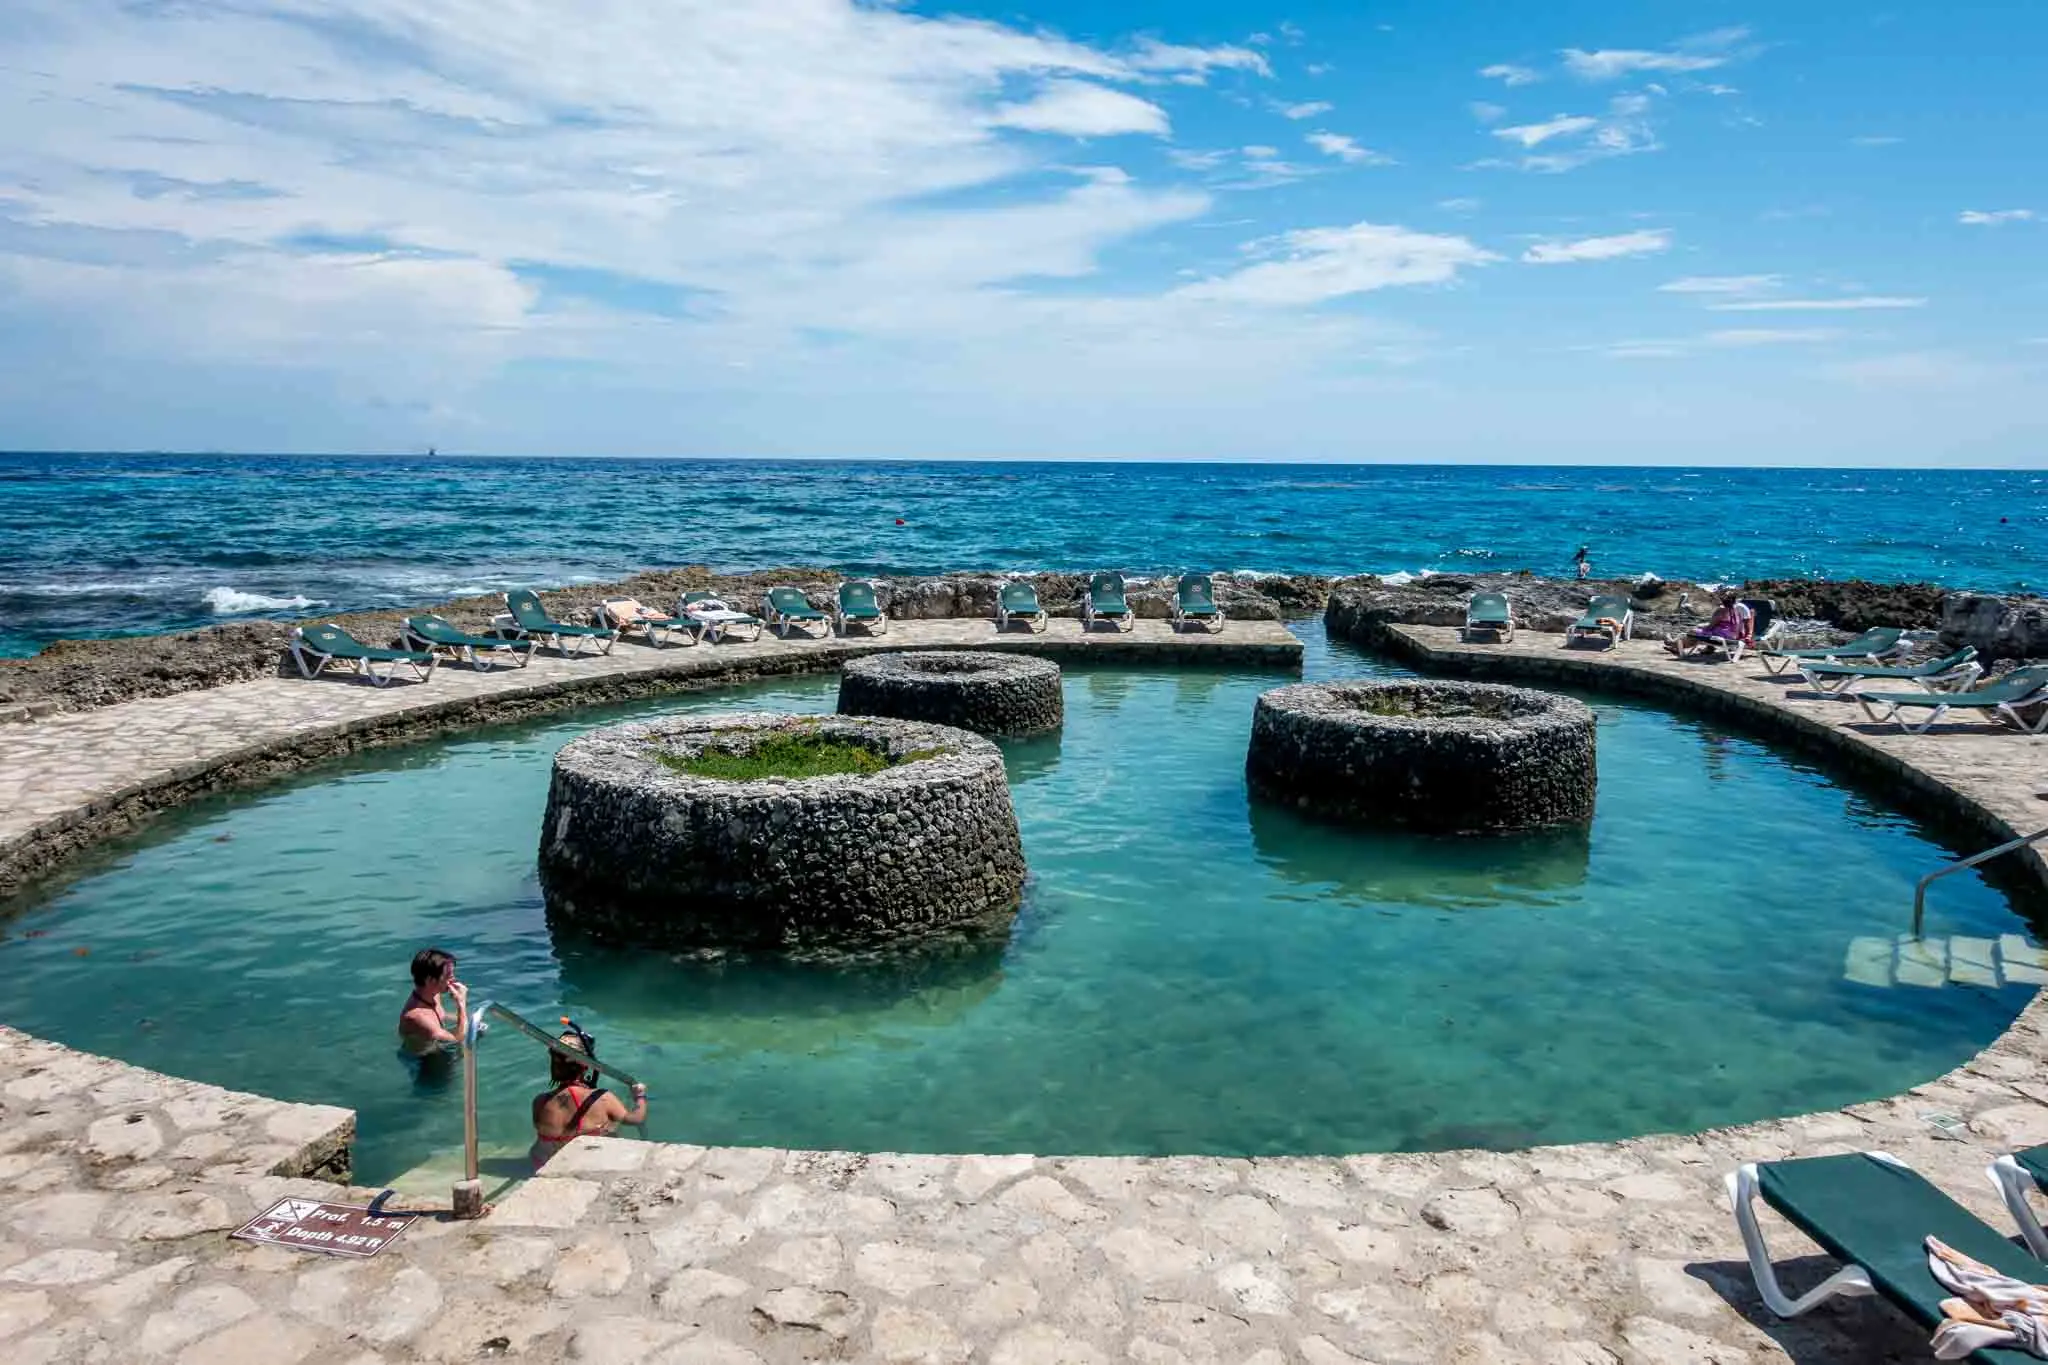 Circular adults-only pool with path to the ocean 